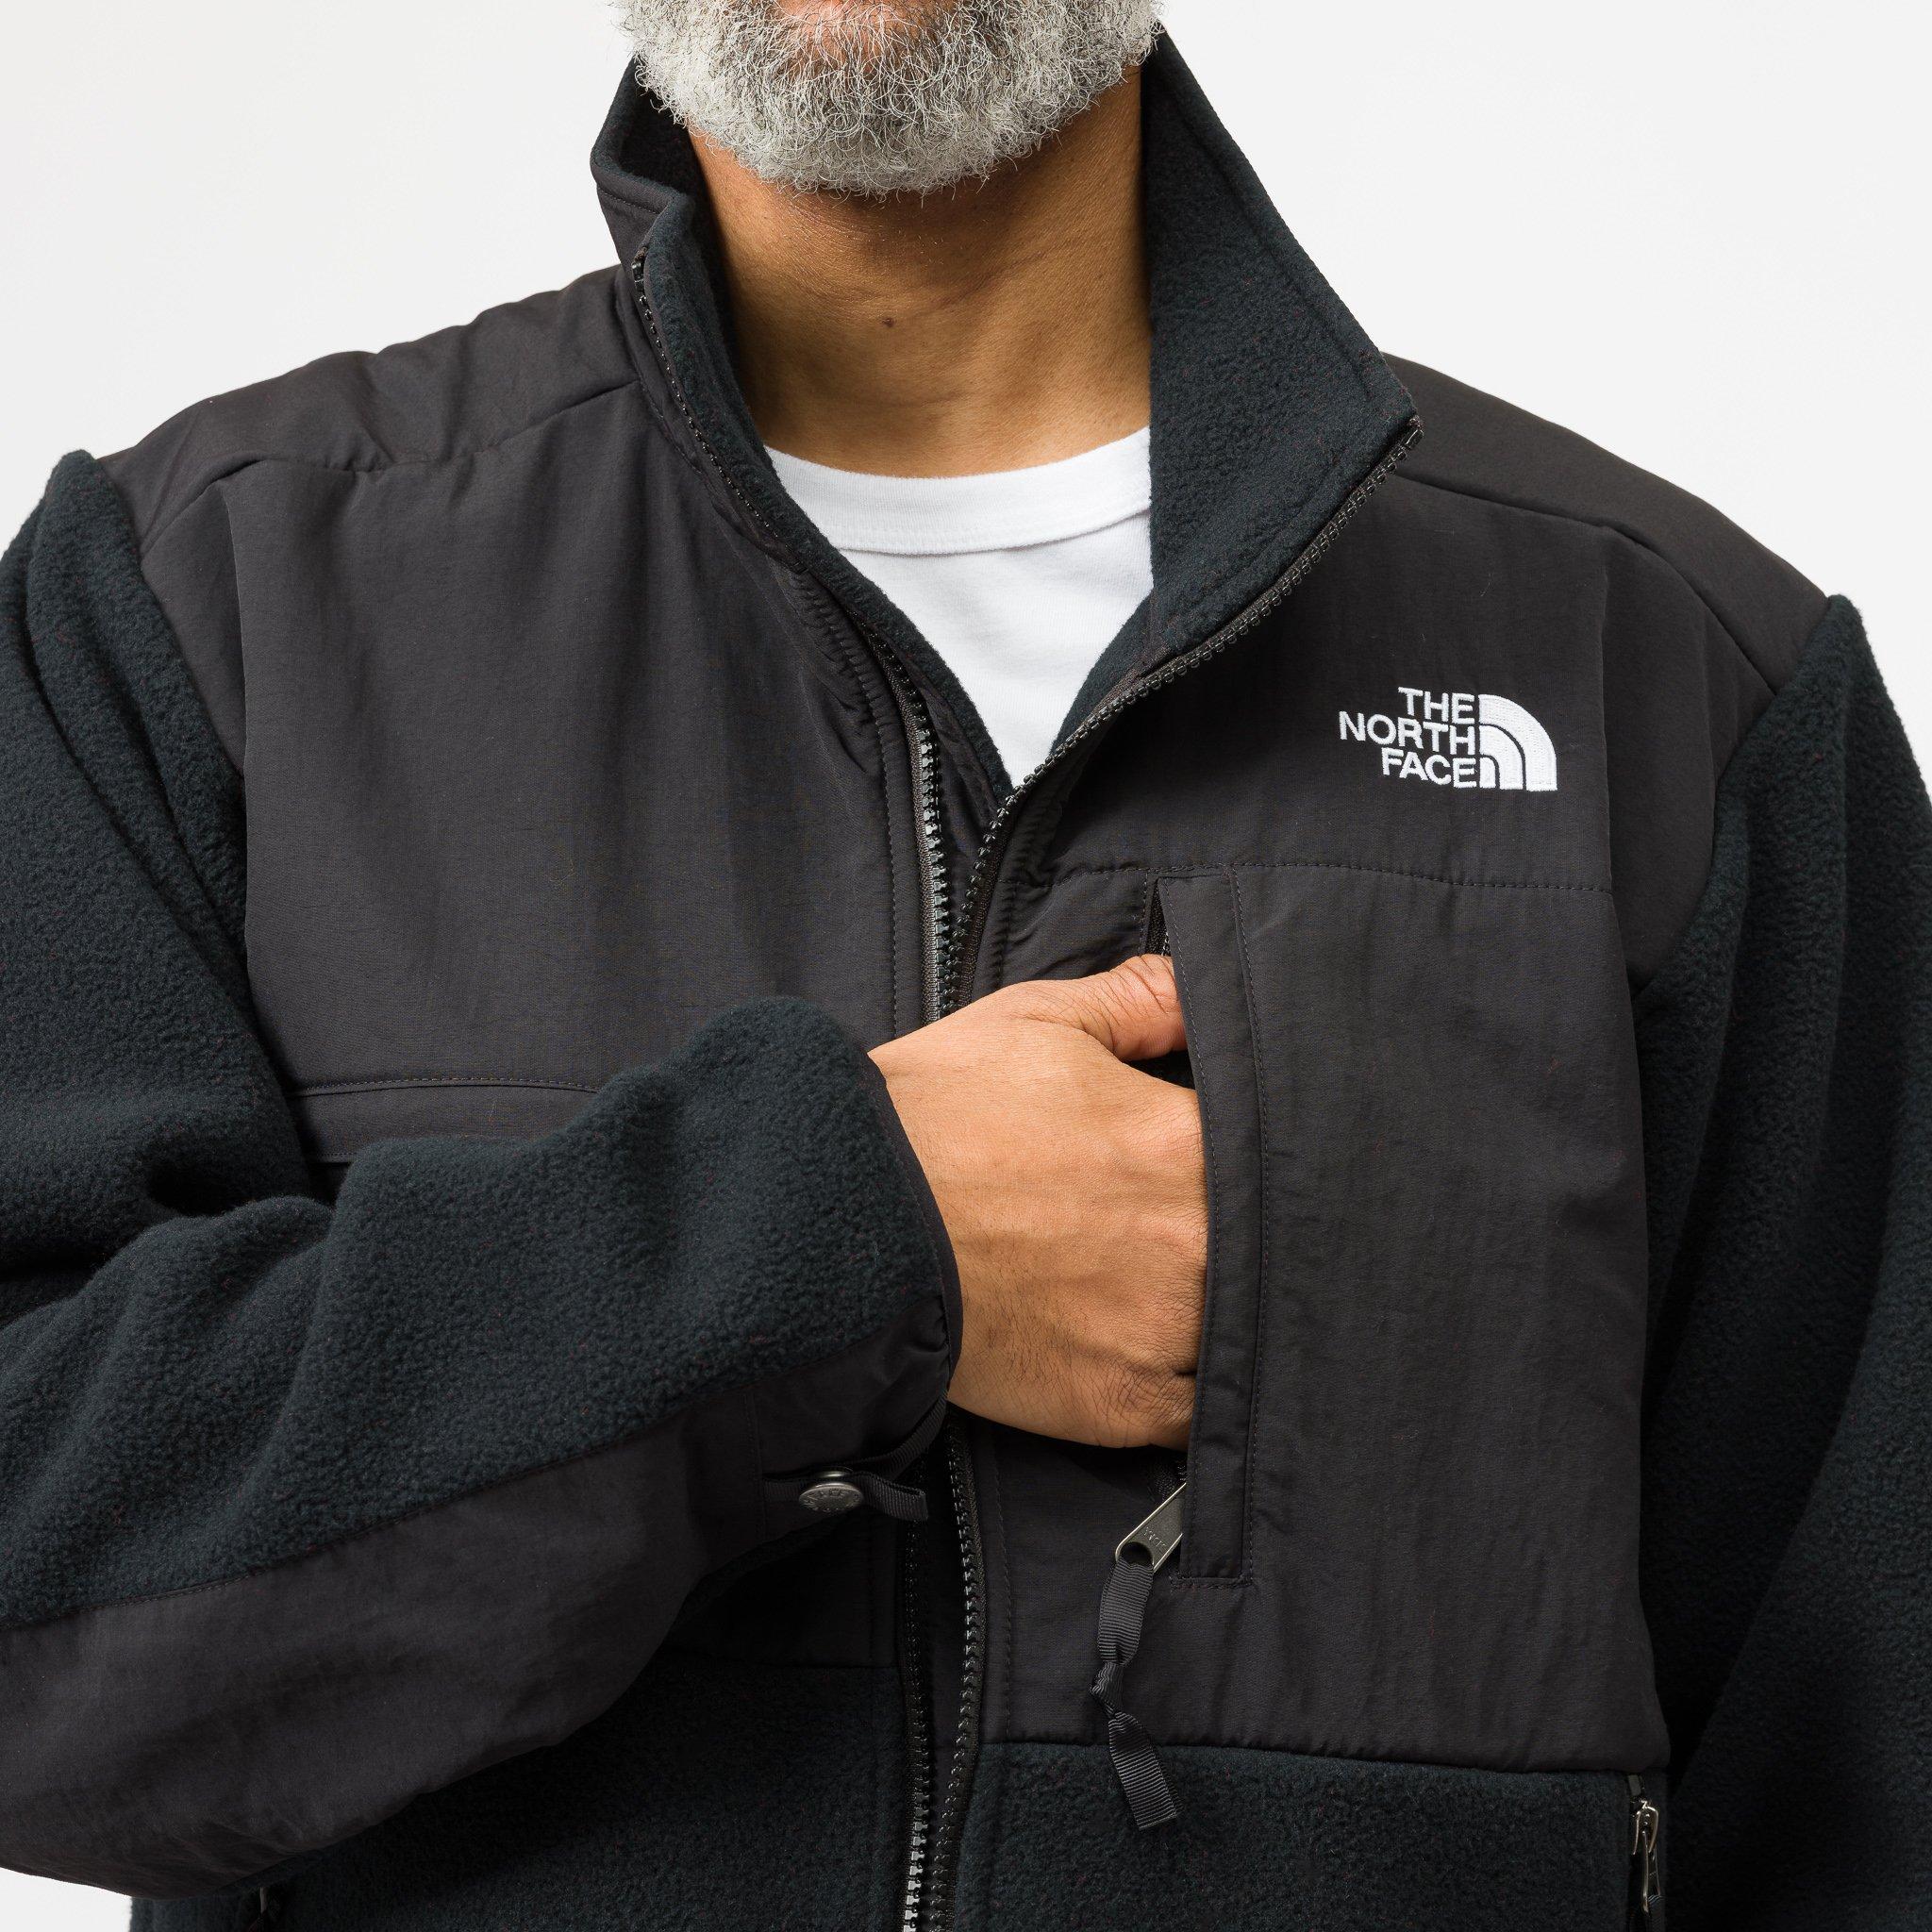 The North Face Synthetic 95 Retro Denali Jacket in Black for Men - Save 73%  - Lyst